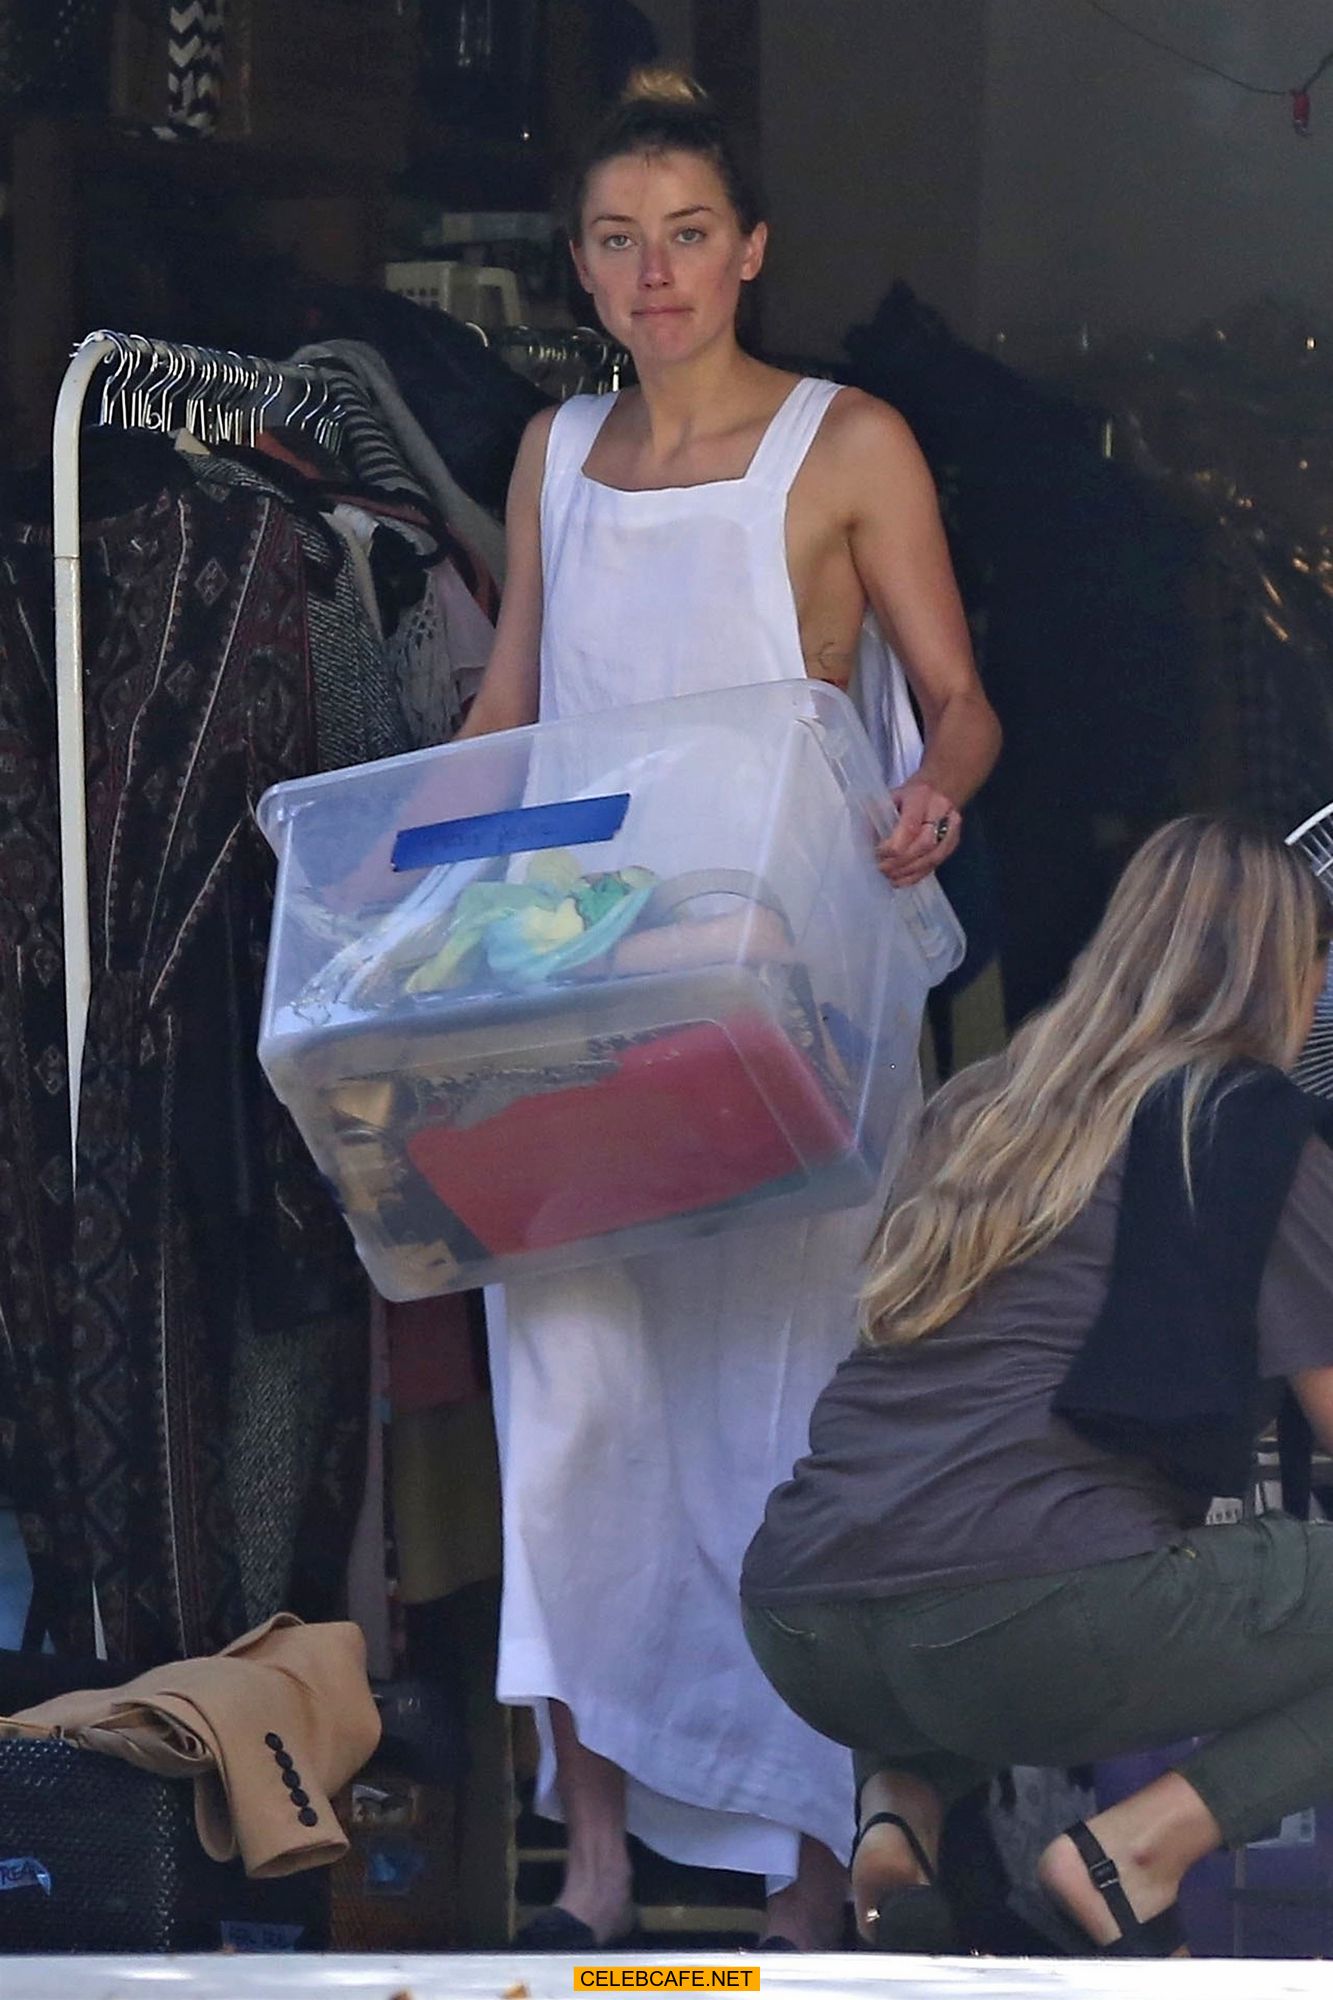 amber_heard_has_a_nip-slip_while_cleaning_out_her_garage_in_la_07302018_2.jpg